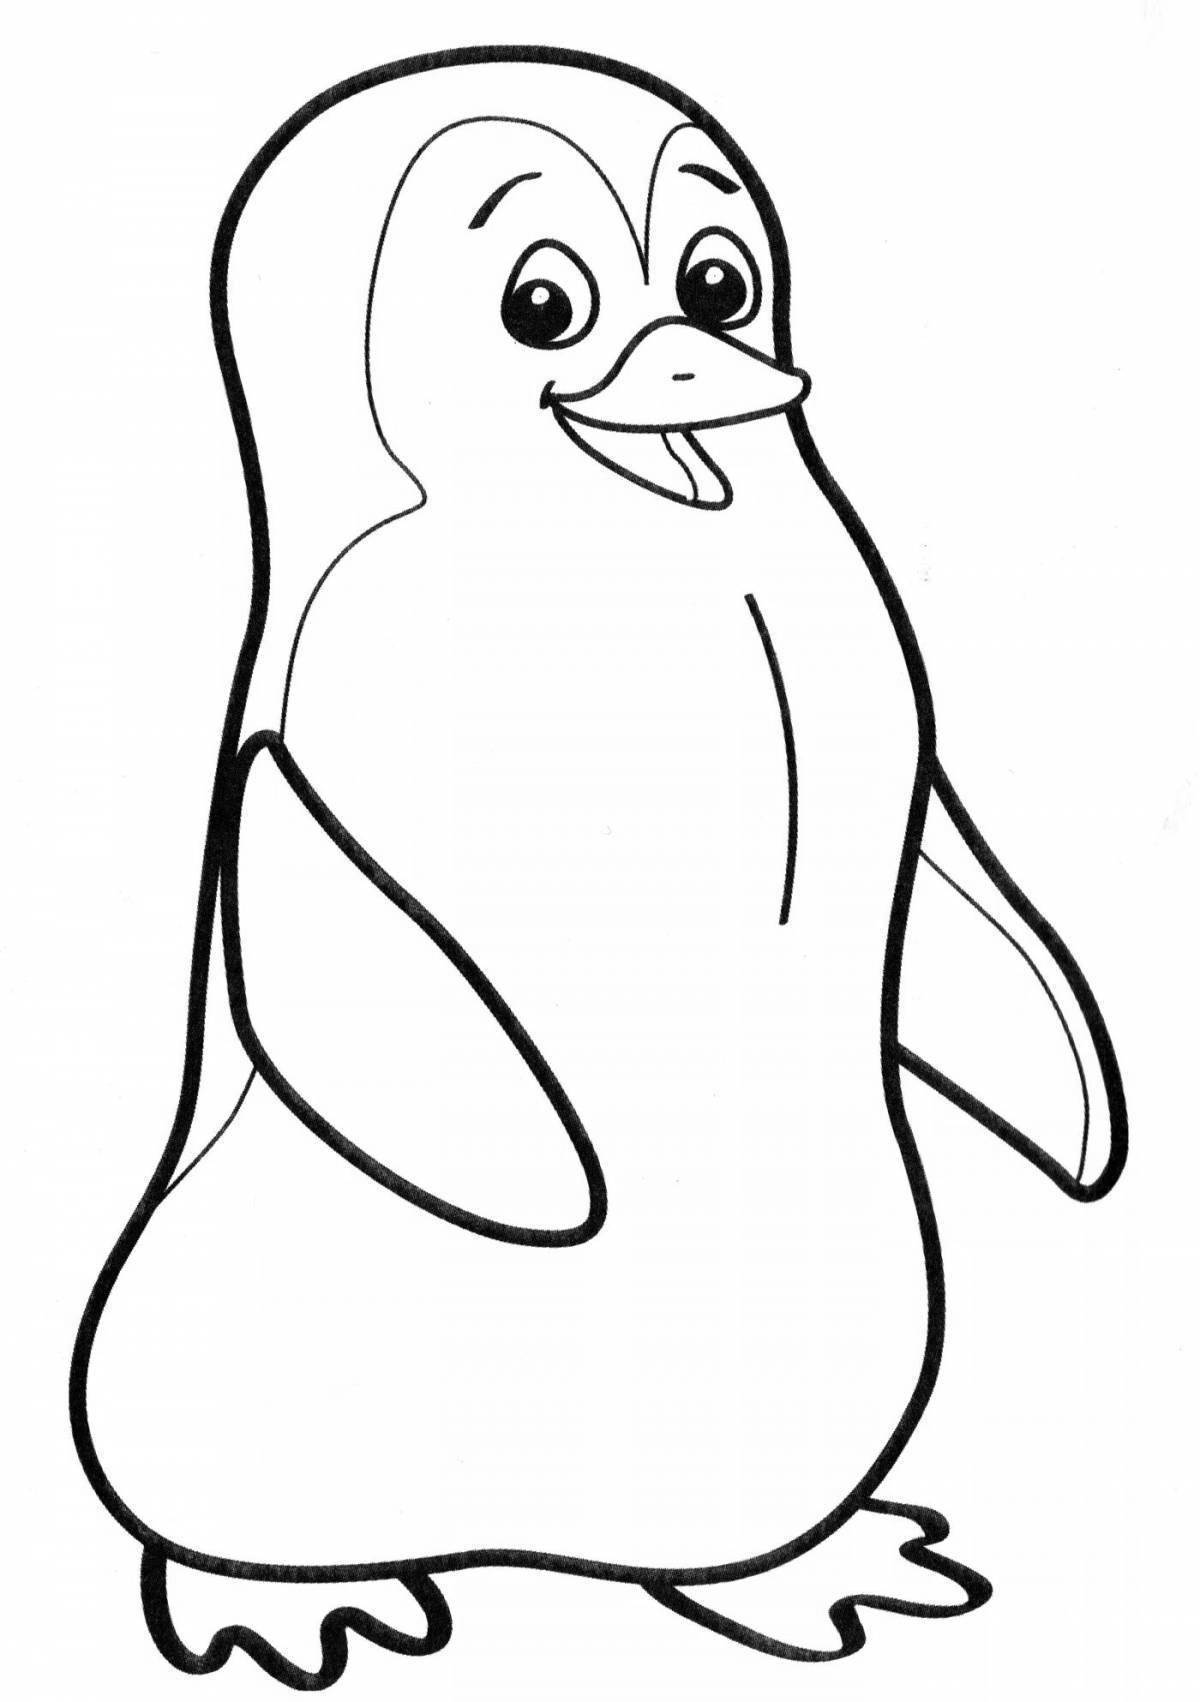 Charming penguin coloring book